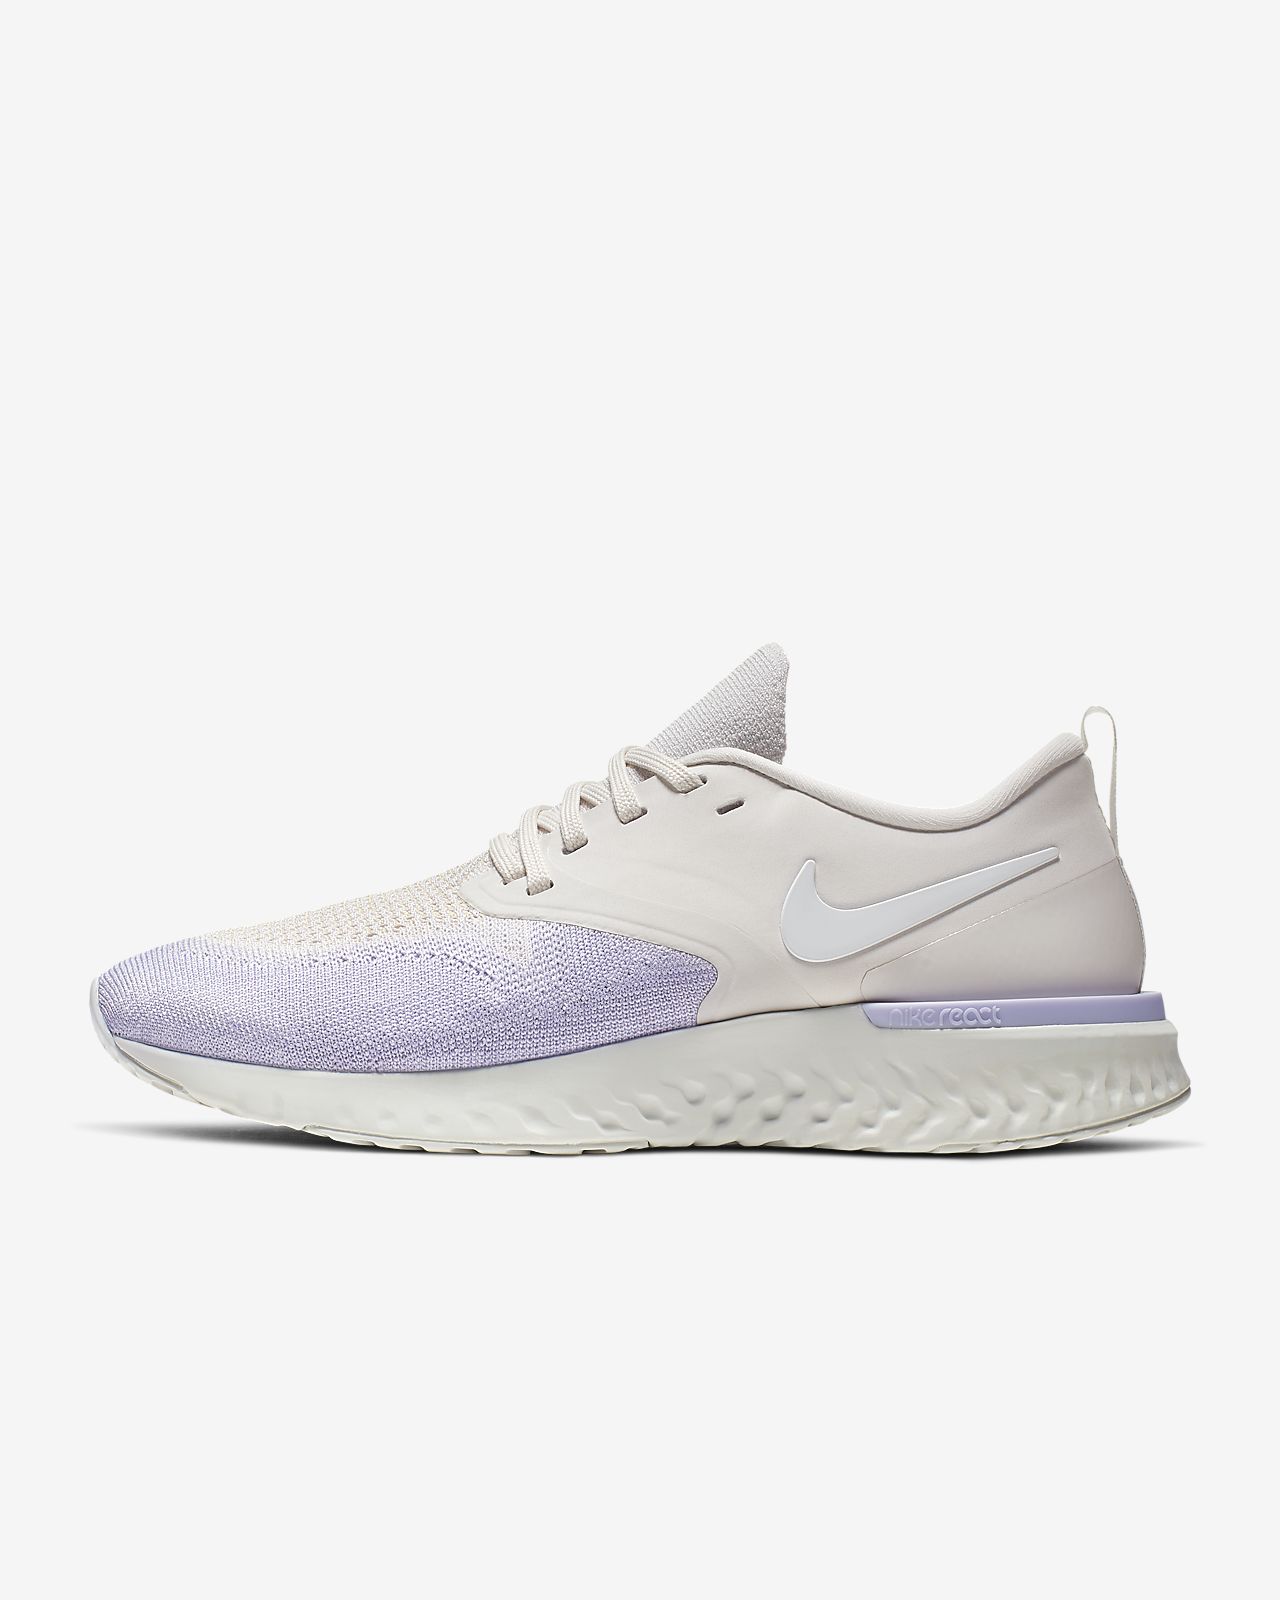 odyssey react ladies running shoes